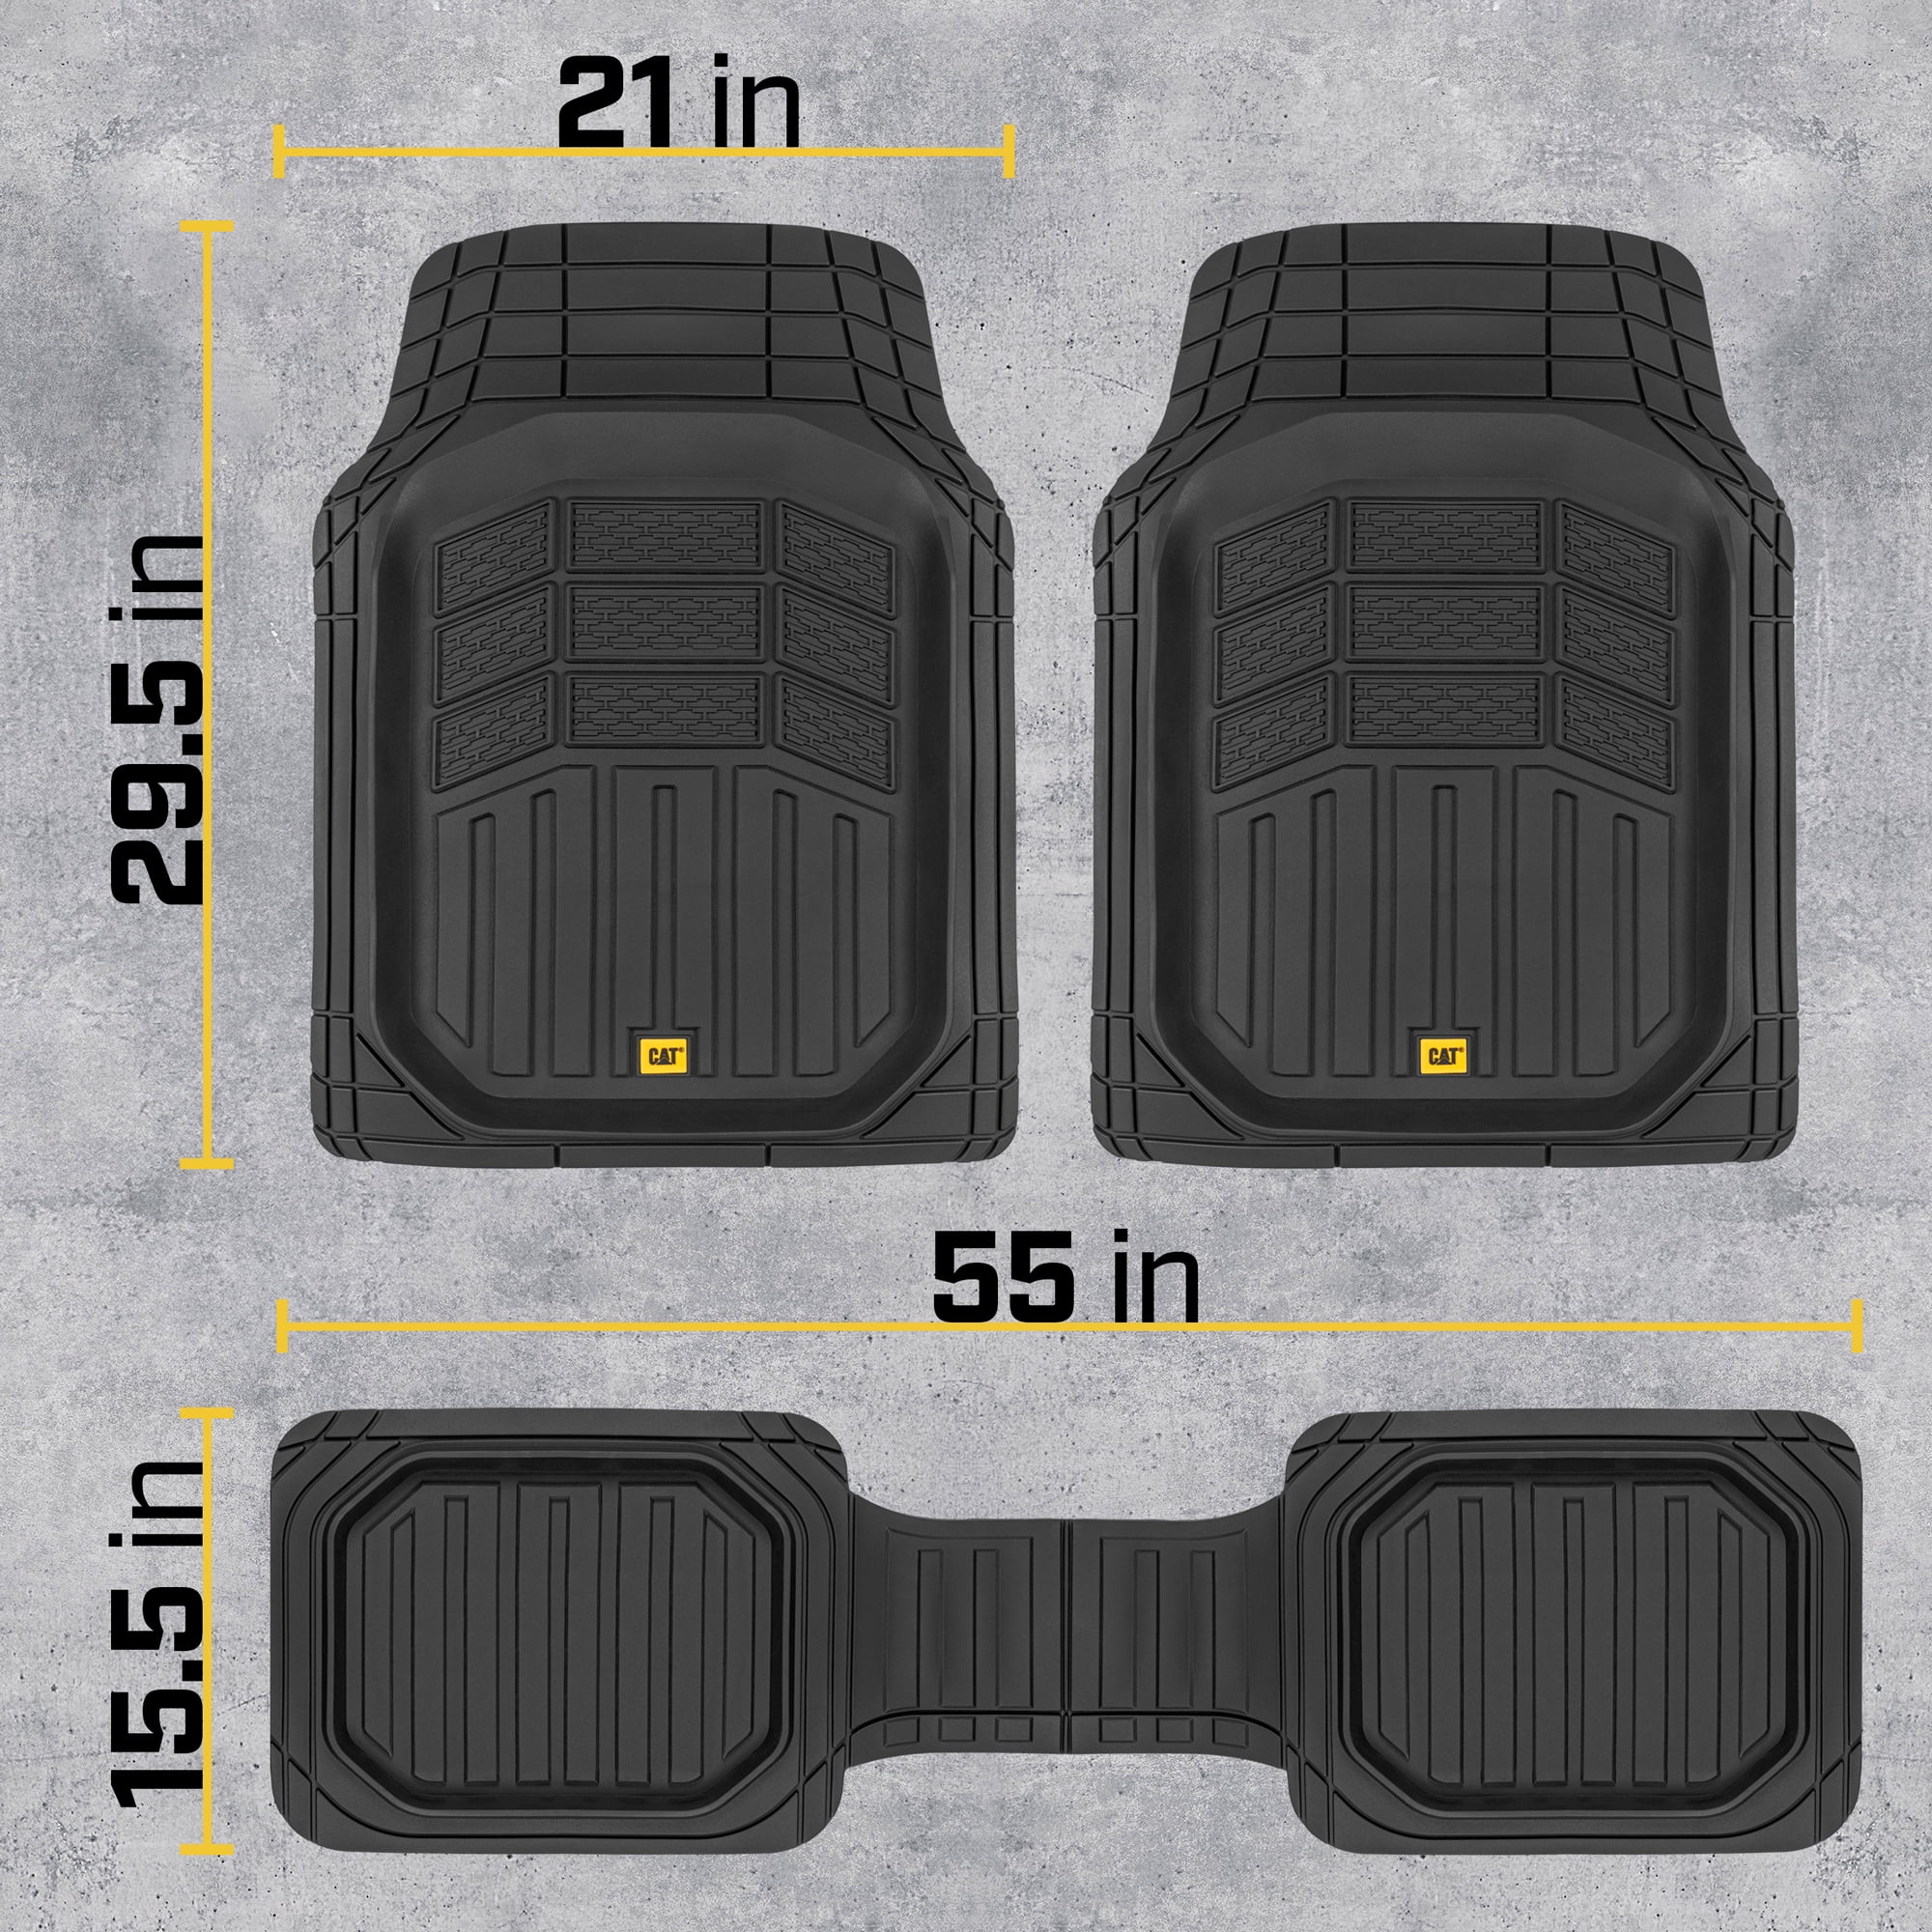 Trim to Fit for Car Truck SUV & Van All Weather Total Protection Durable Liners Heavy Duty Odorless 02-Beige CAMT-9013-BG 3-Piece Deep Dish Rubber Truck Floor Mats Caterpillar CAT CAMT-9013 